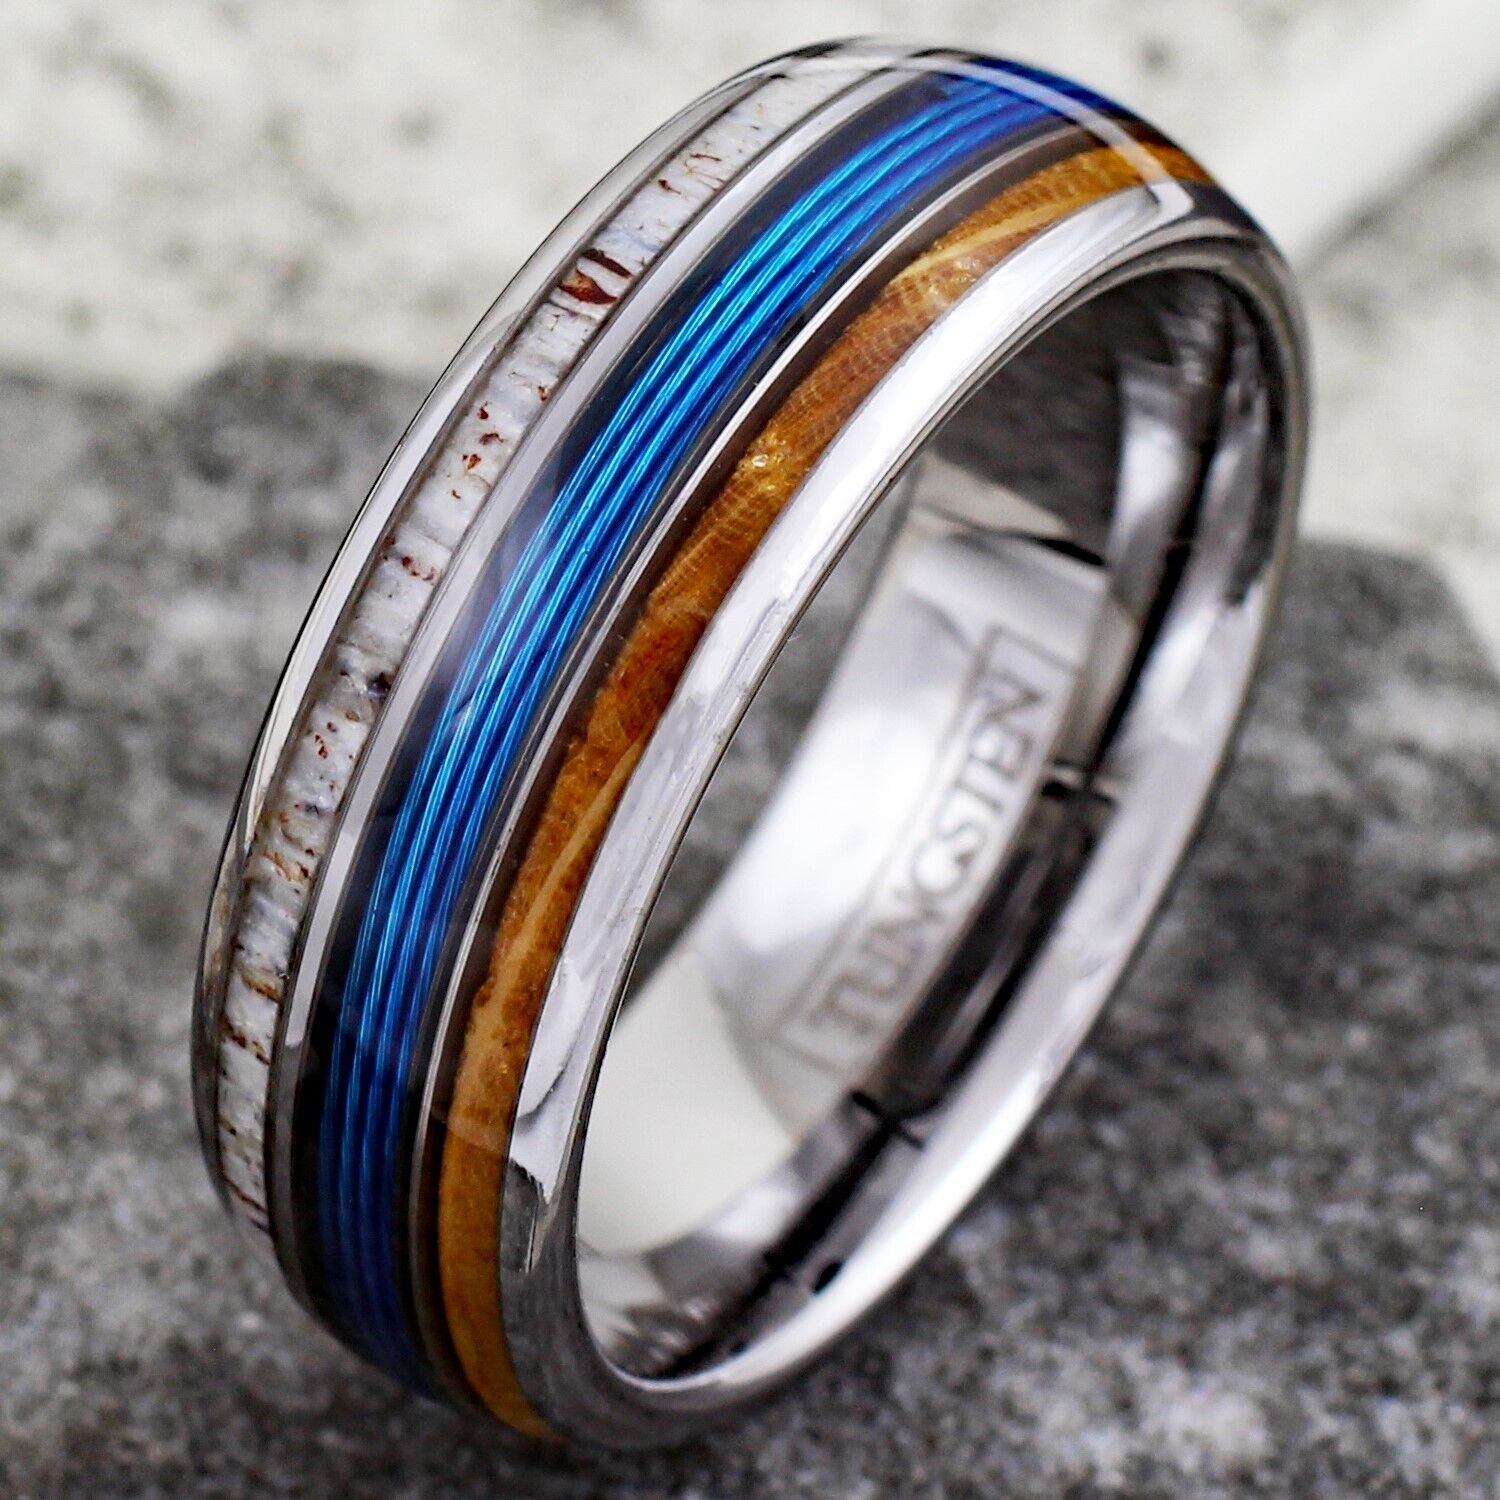 Polished Silver Low Dome Tungsten Band Ring w/ Blue Fishing Line